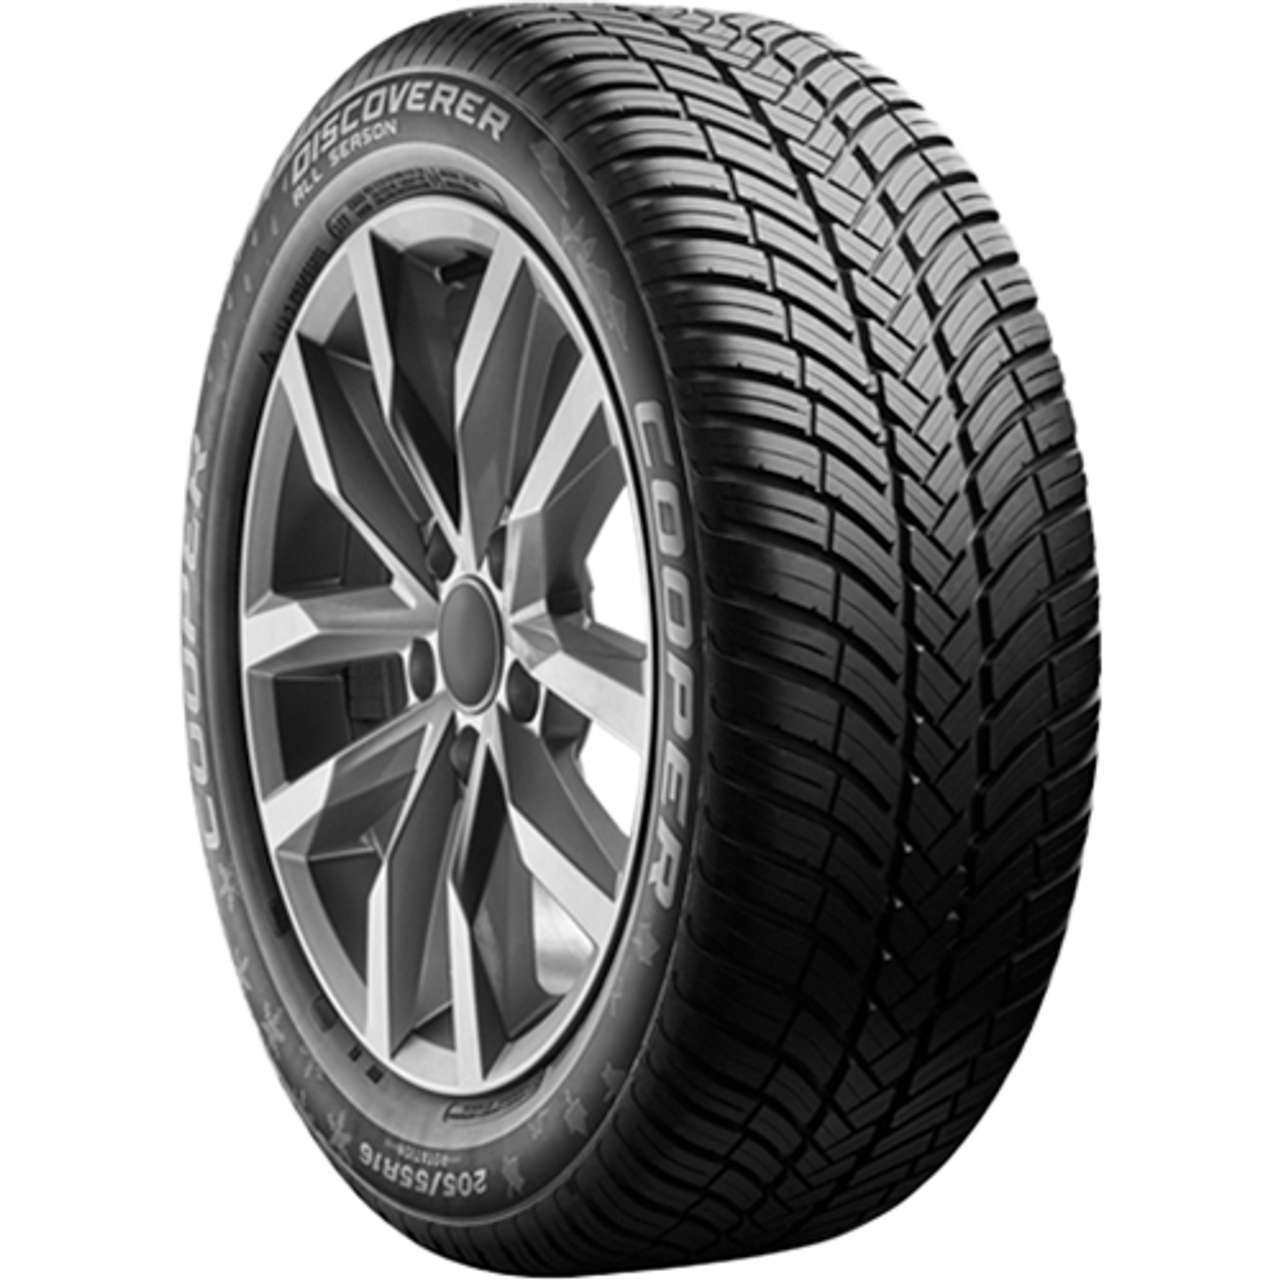 COOPER DISCOVERER ALL SEASON 215/50R18 92W BSW